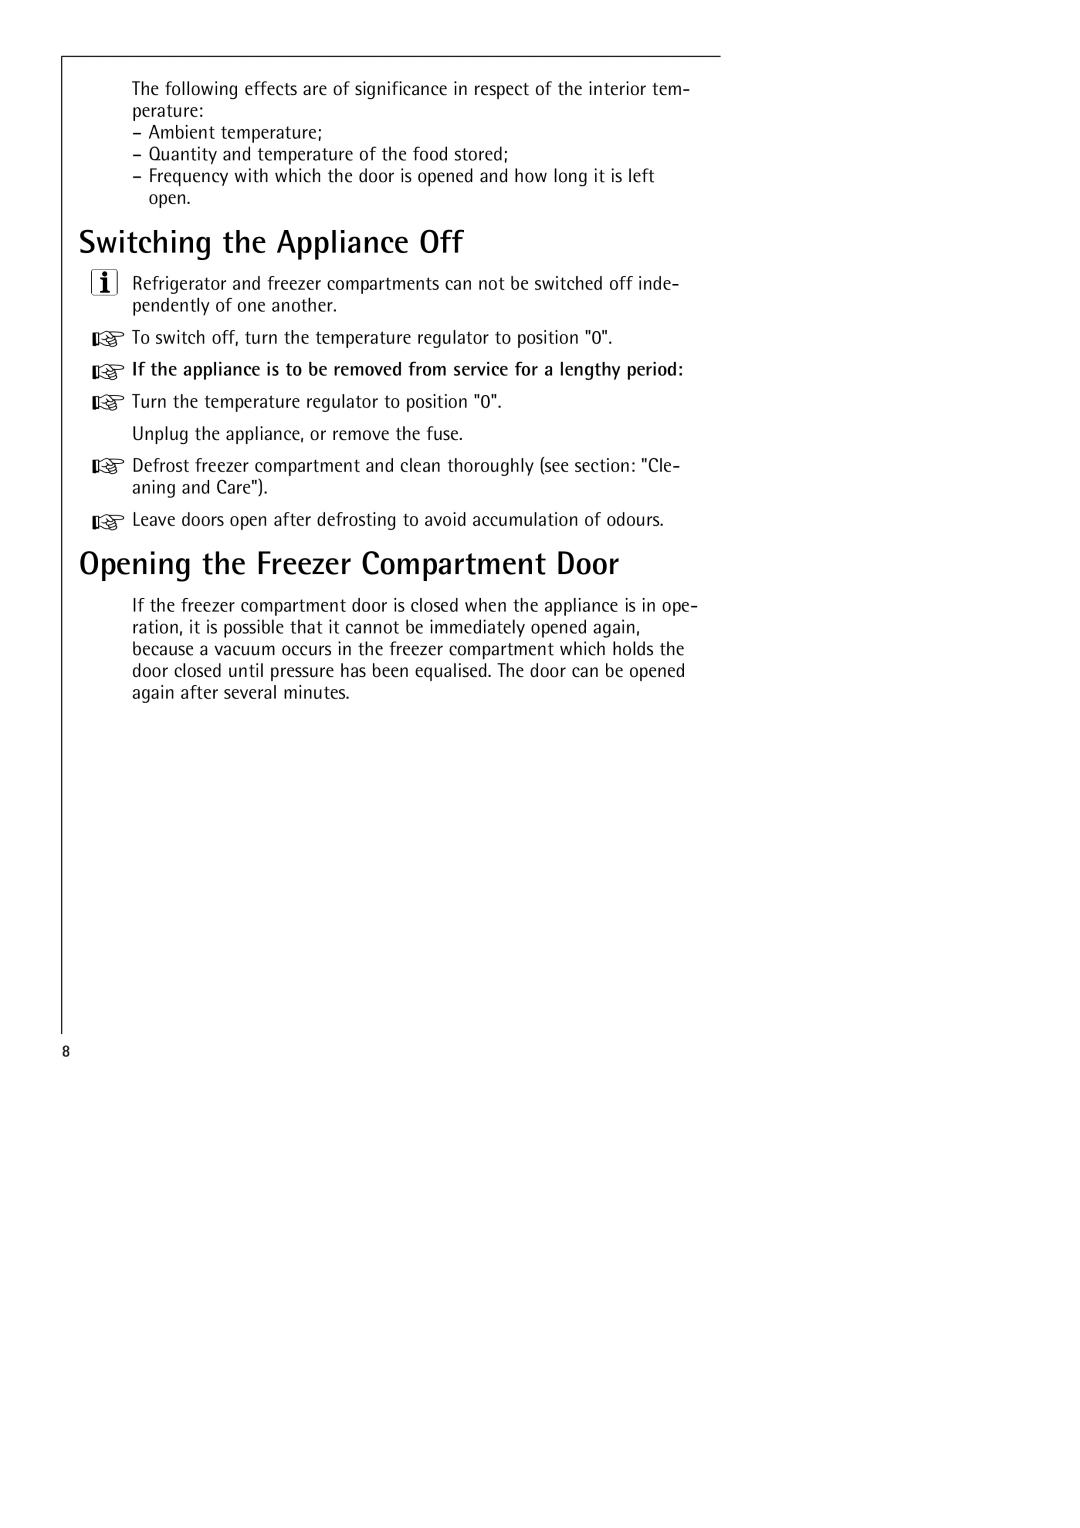 Electrolux SANTO 70398-DT manual Switching the Appliance Off, Opening the Freezer Compartment Door 